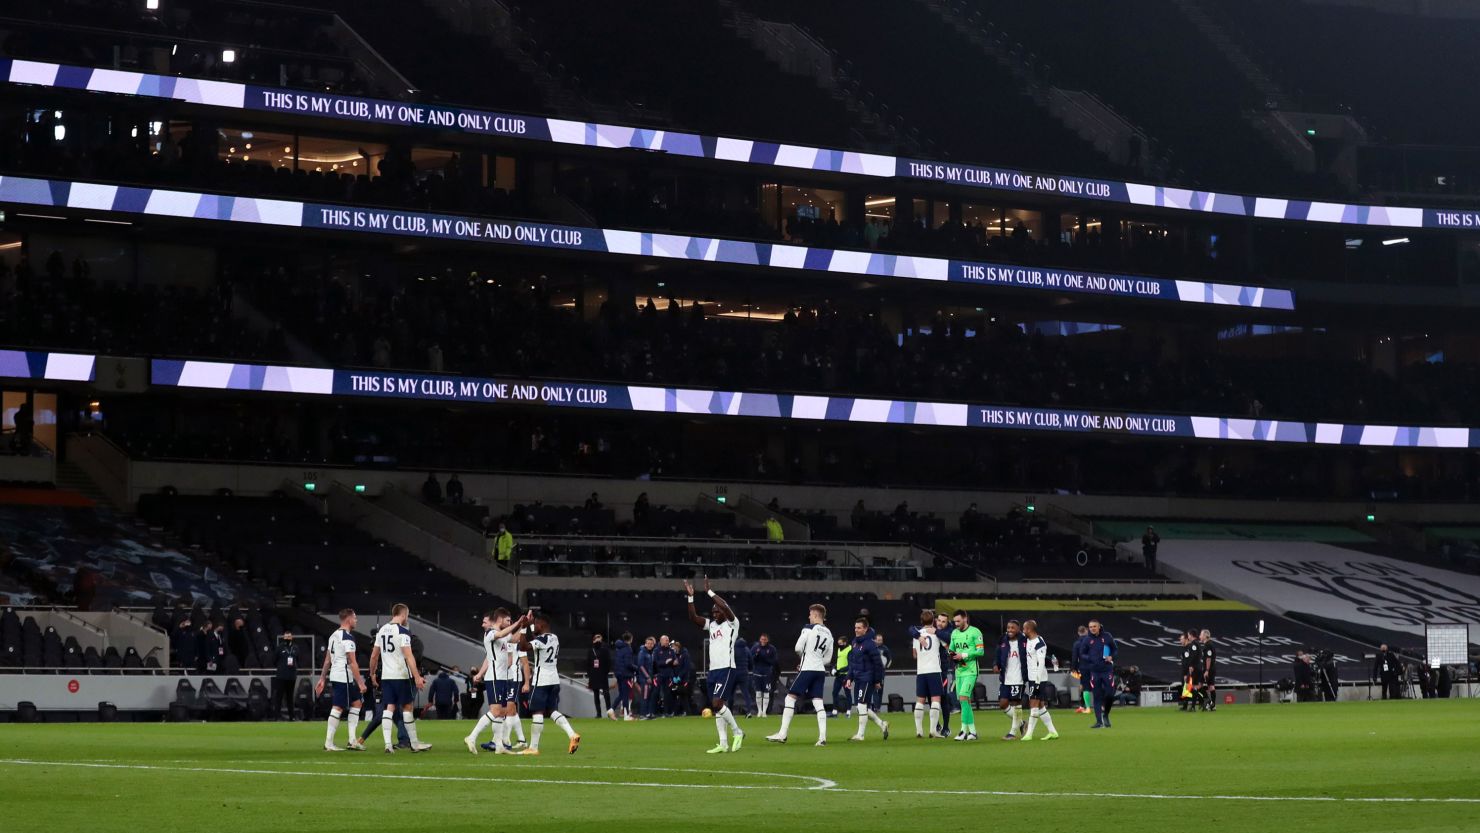 General view as Tottenham acknowledge fans at the end of a Premier League match at Tottenham Hotspur Stadium on December 06, 2020 in London, England.